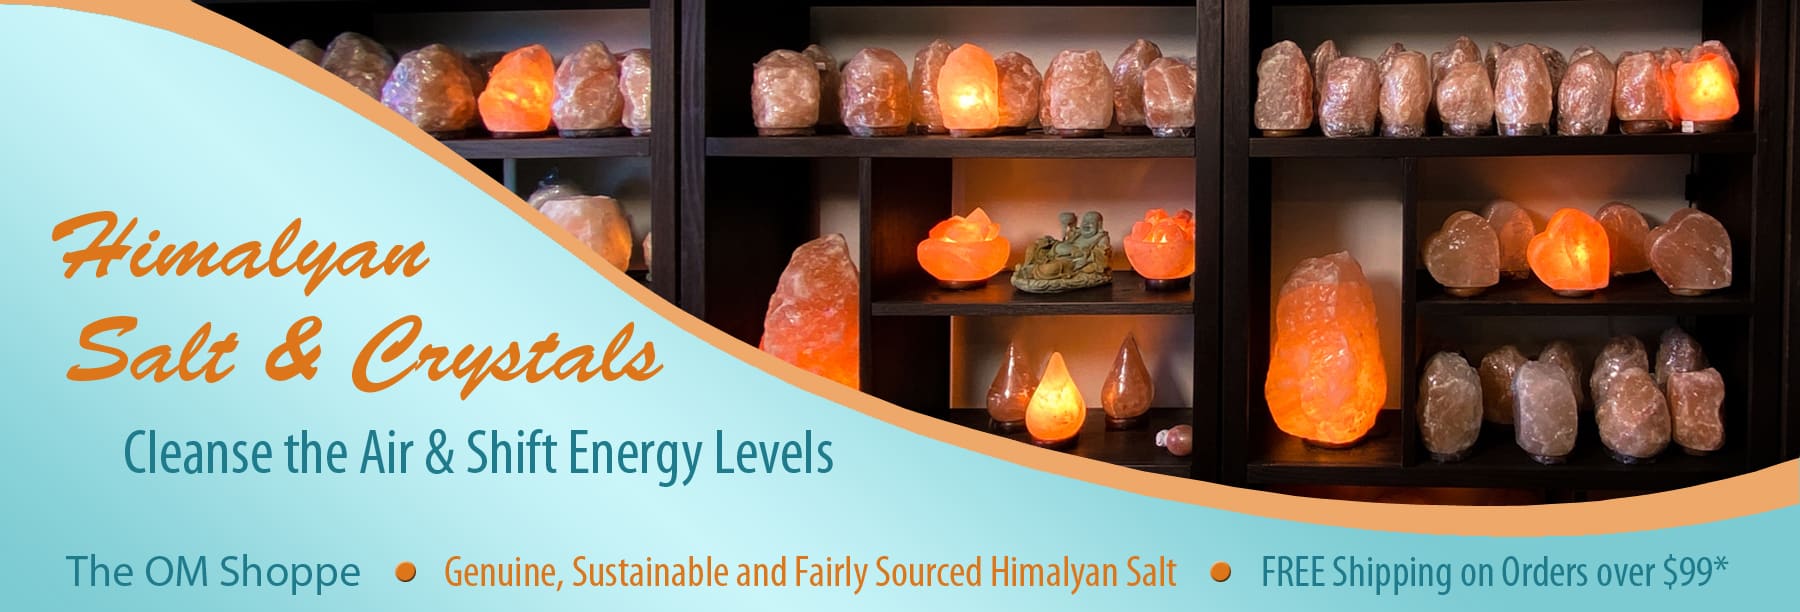 The OM Shopee Himalayan Salt and Crystalst